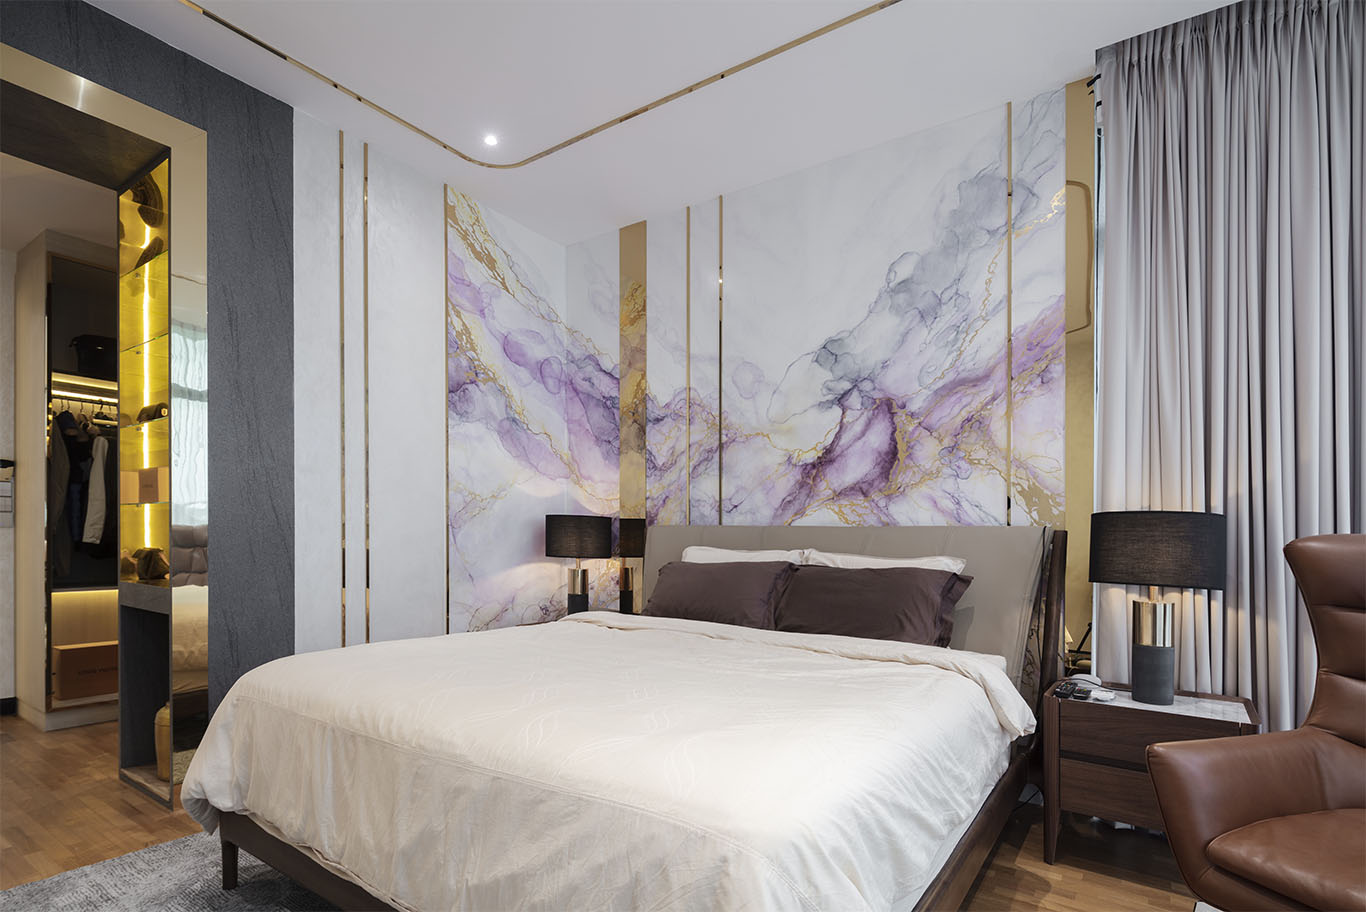 MIEUX La Famillie De Lee luxurious bedroom with white purple and gold marble wall and dark brown table night lamp 2 mieux interior design